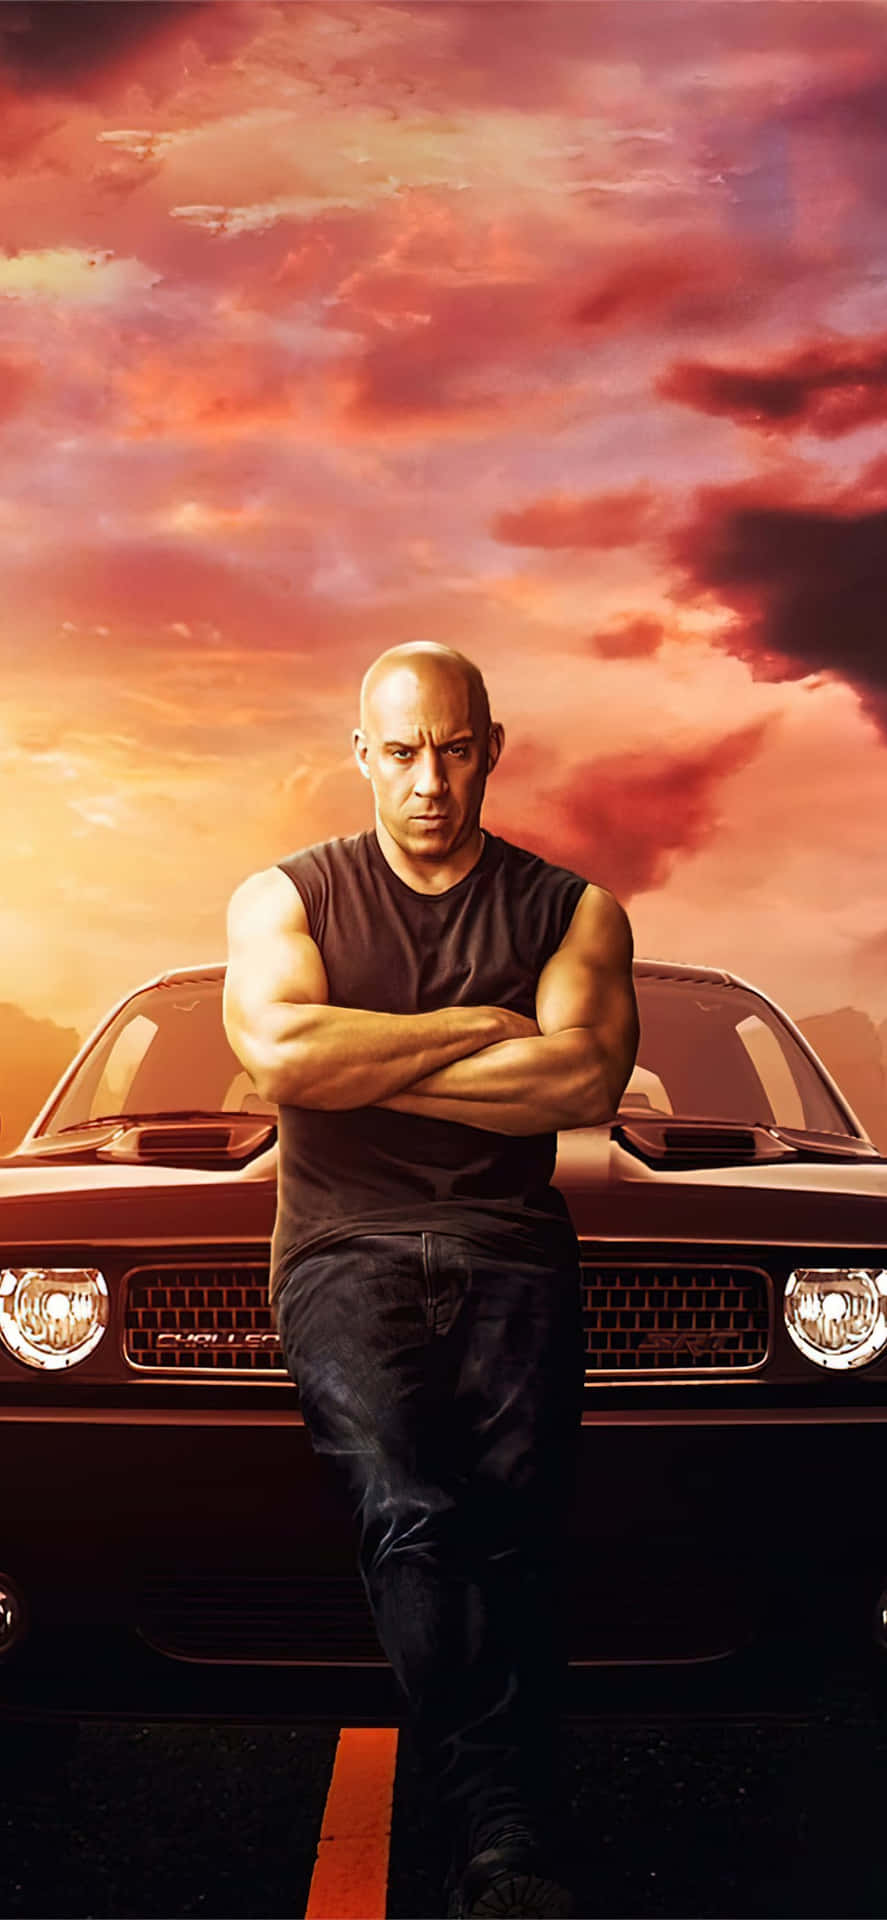 The Fast And The Furious - Hd 720p Wallpaper